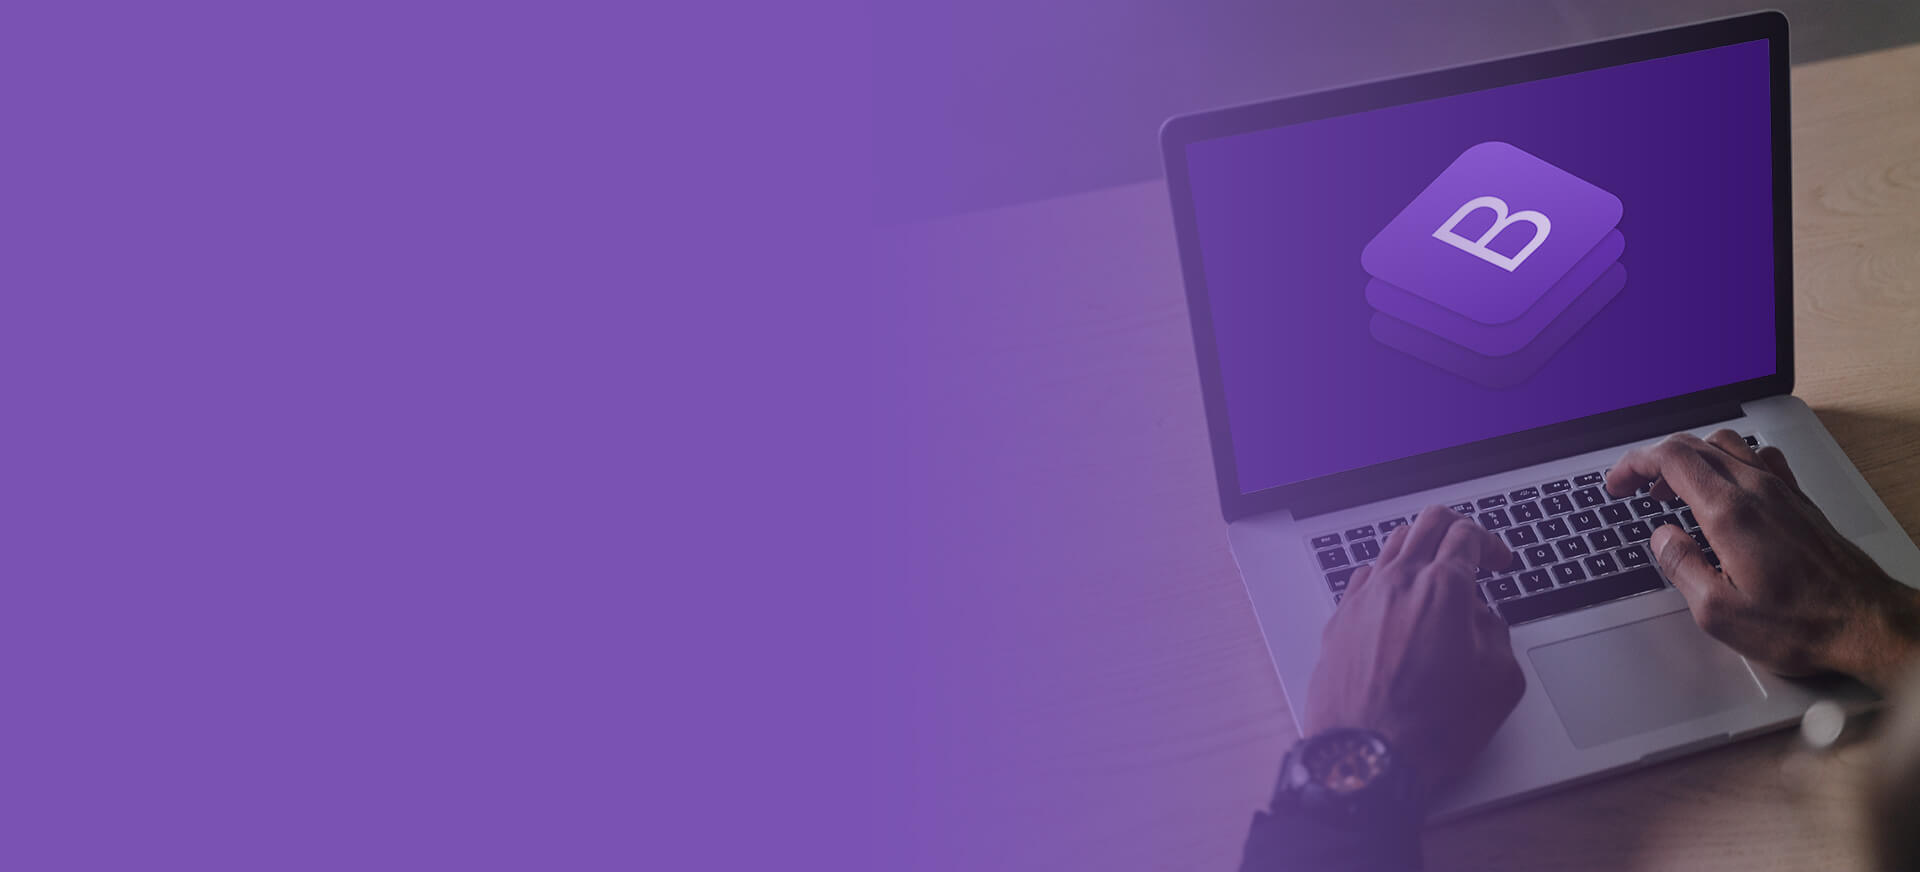 Bootstrap Custom Development and Consulting